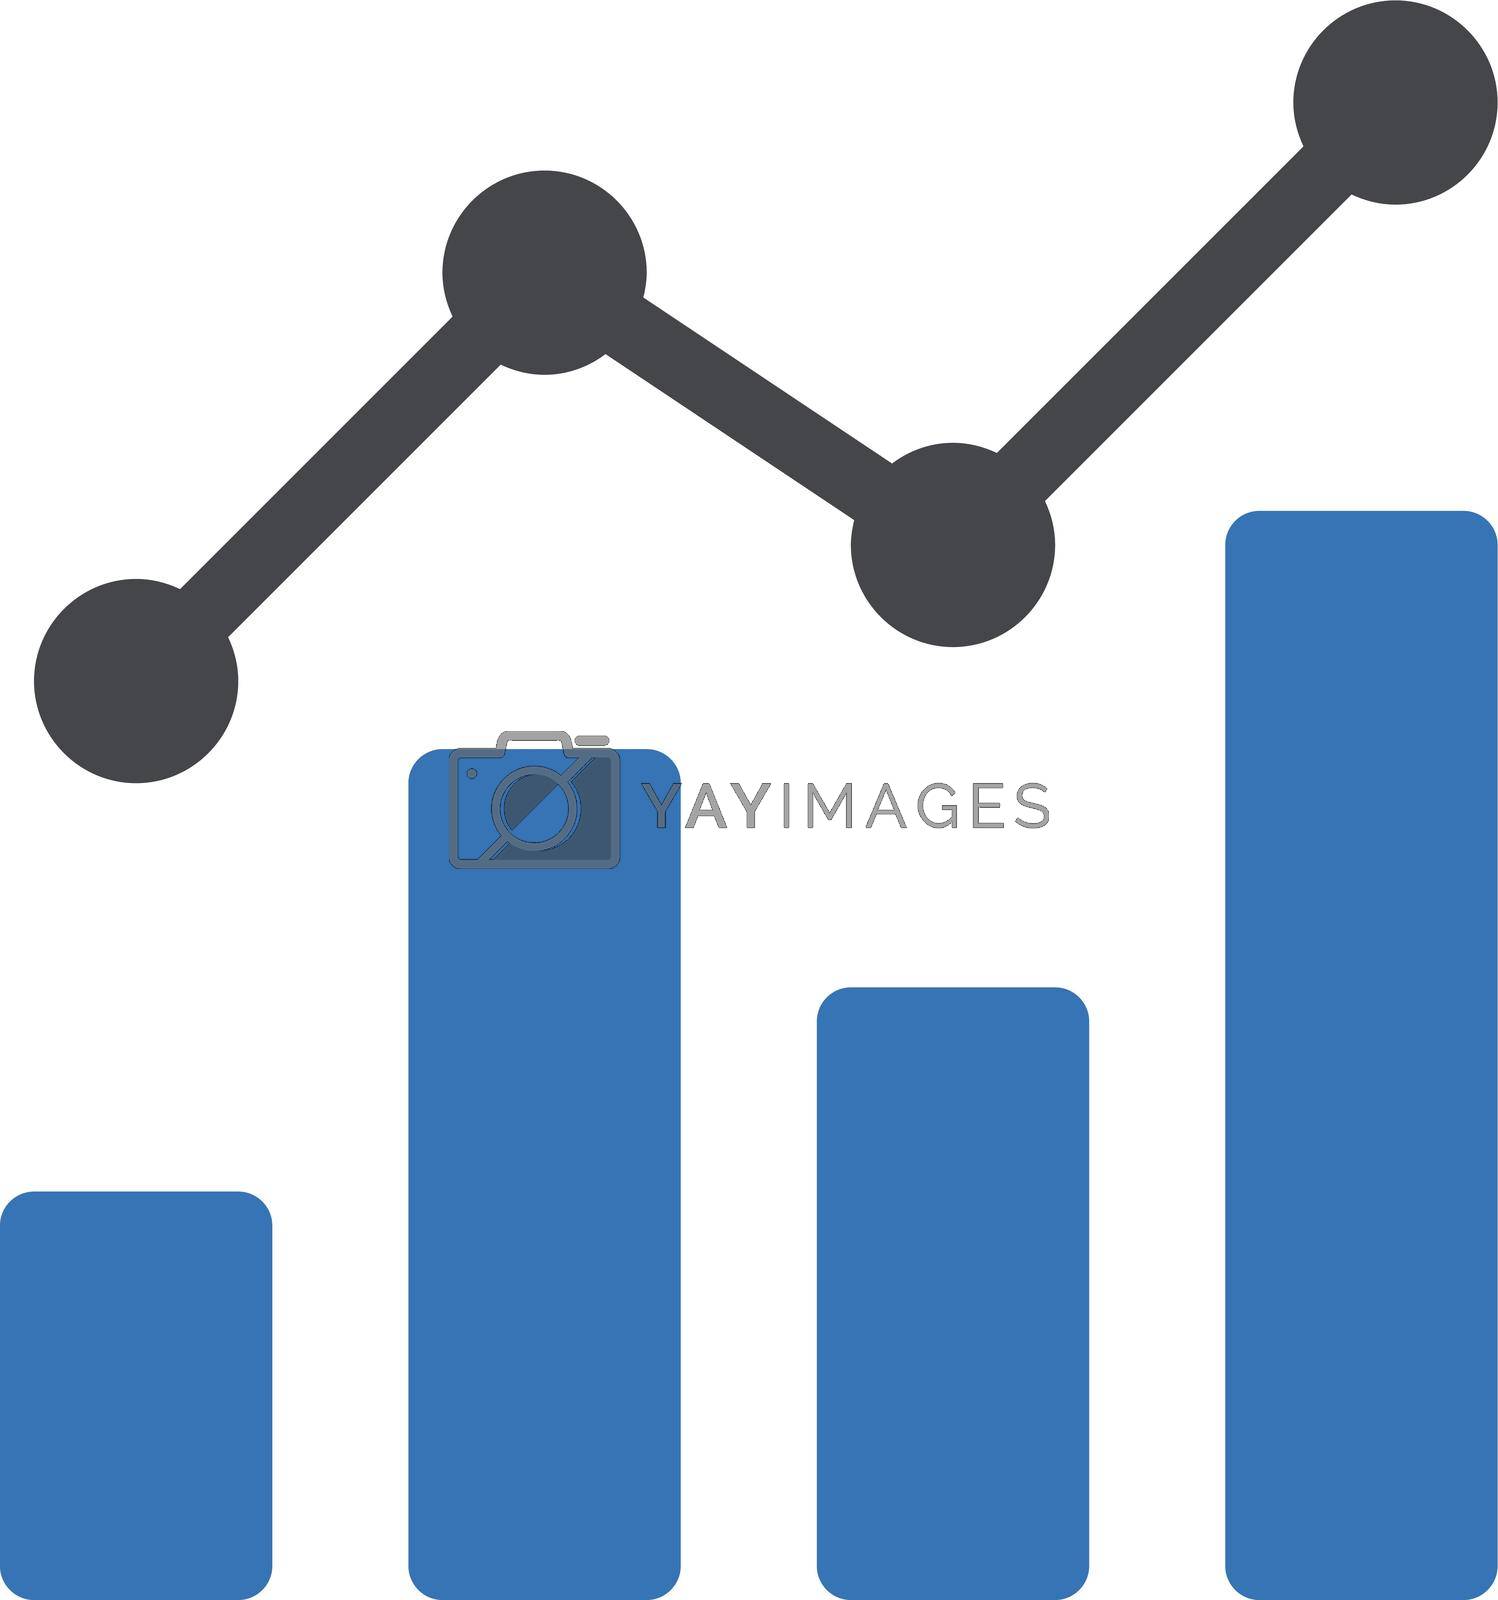 Royalty free image of graph by vectorstall